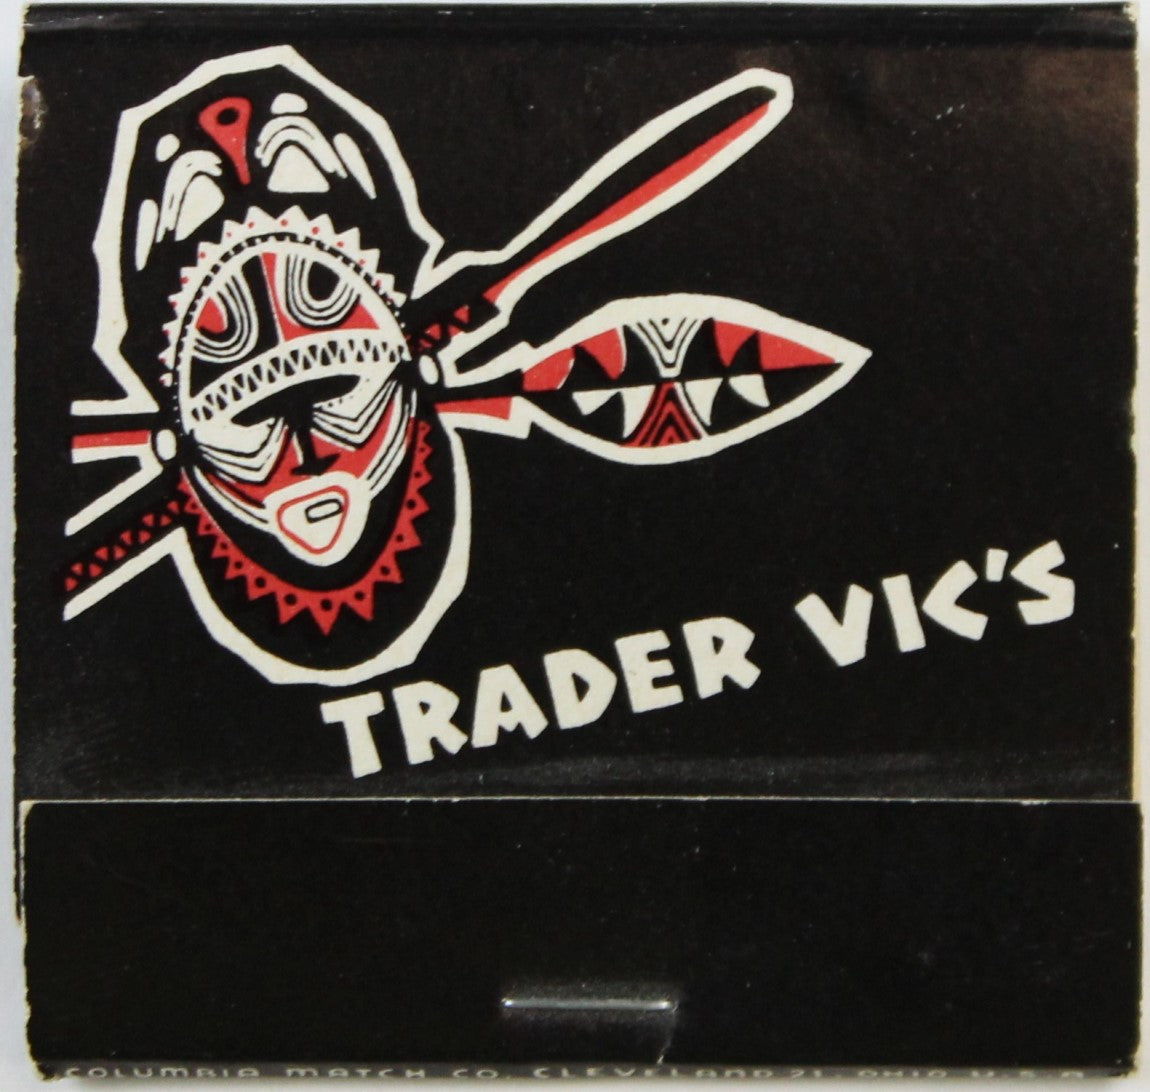 Trader Vic's at The Plaza Hotel Matchbook